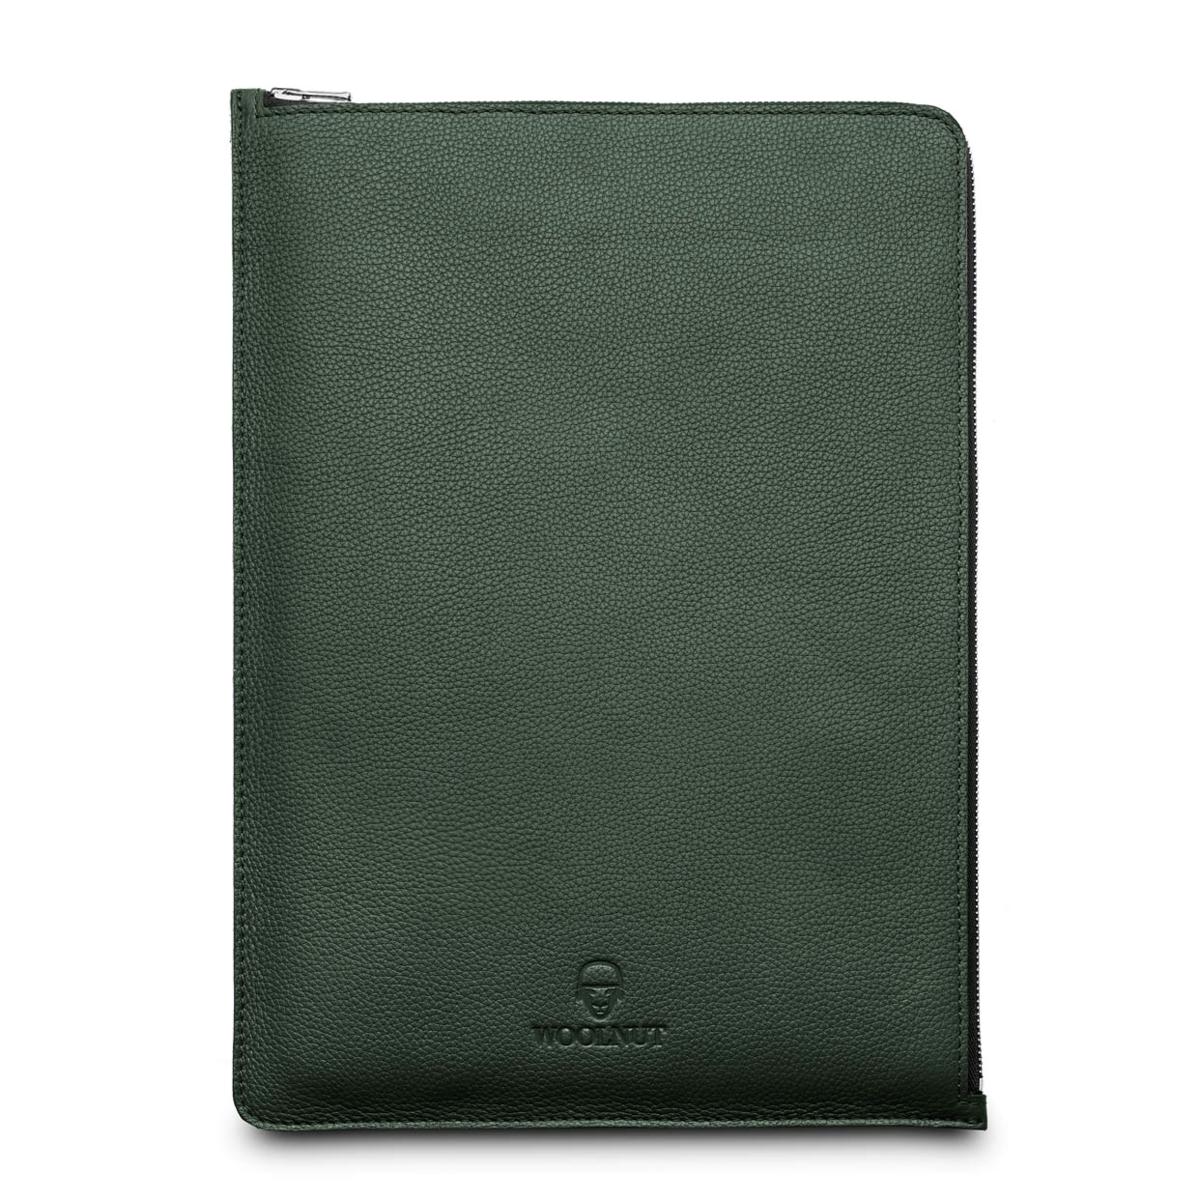 Woolnut Leather Case / Sleeve for MacBook Pro/Air 13 - Green